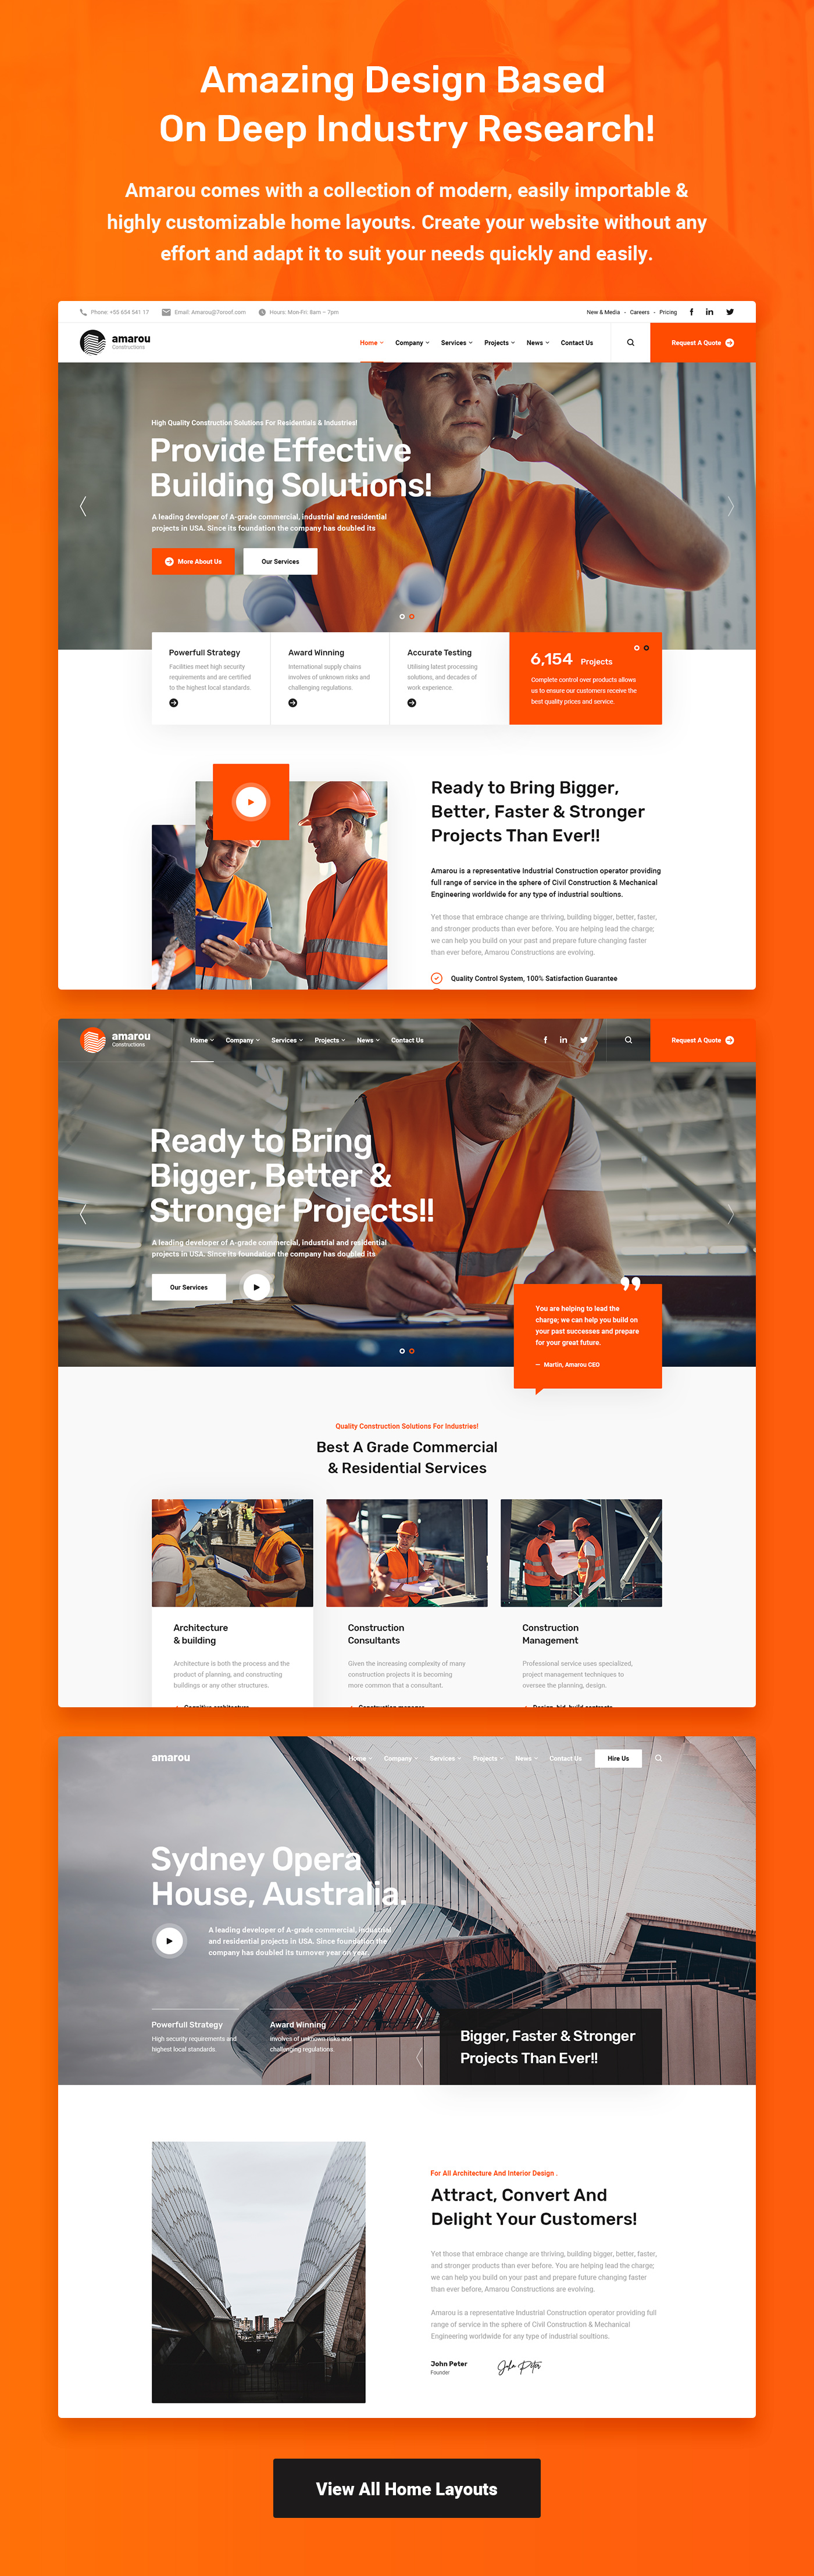 Amarou - Construction and Building HTML5 Template - 6